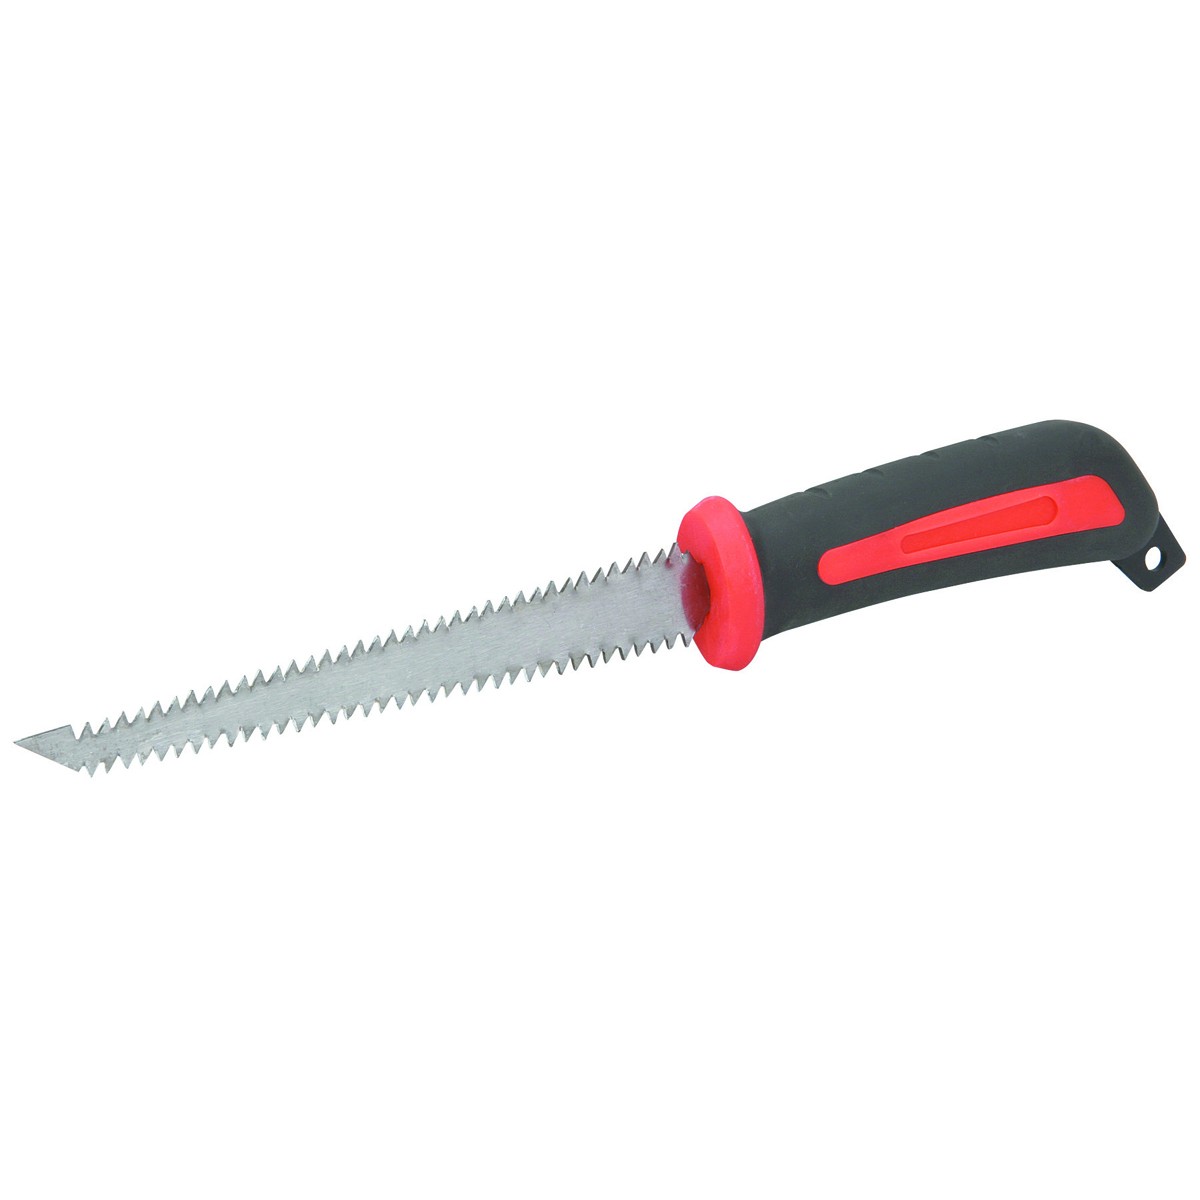 6 In. Double Edged Wallboard Saw